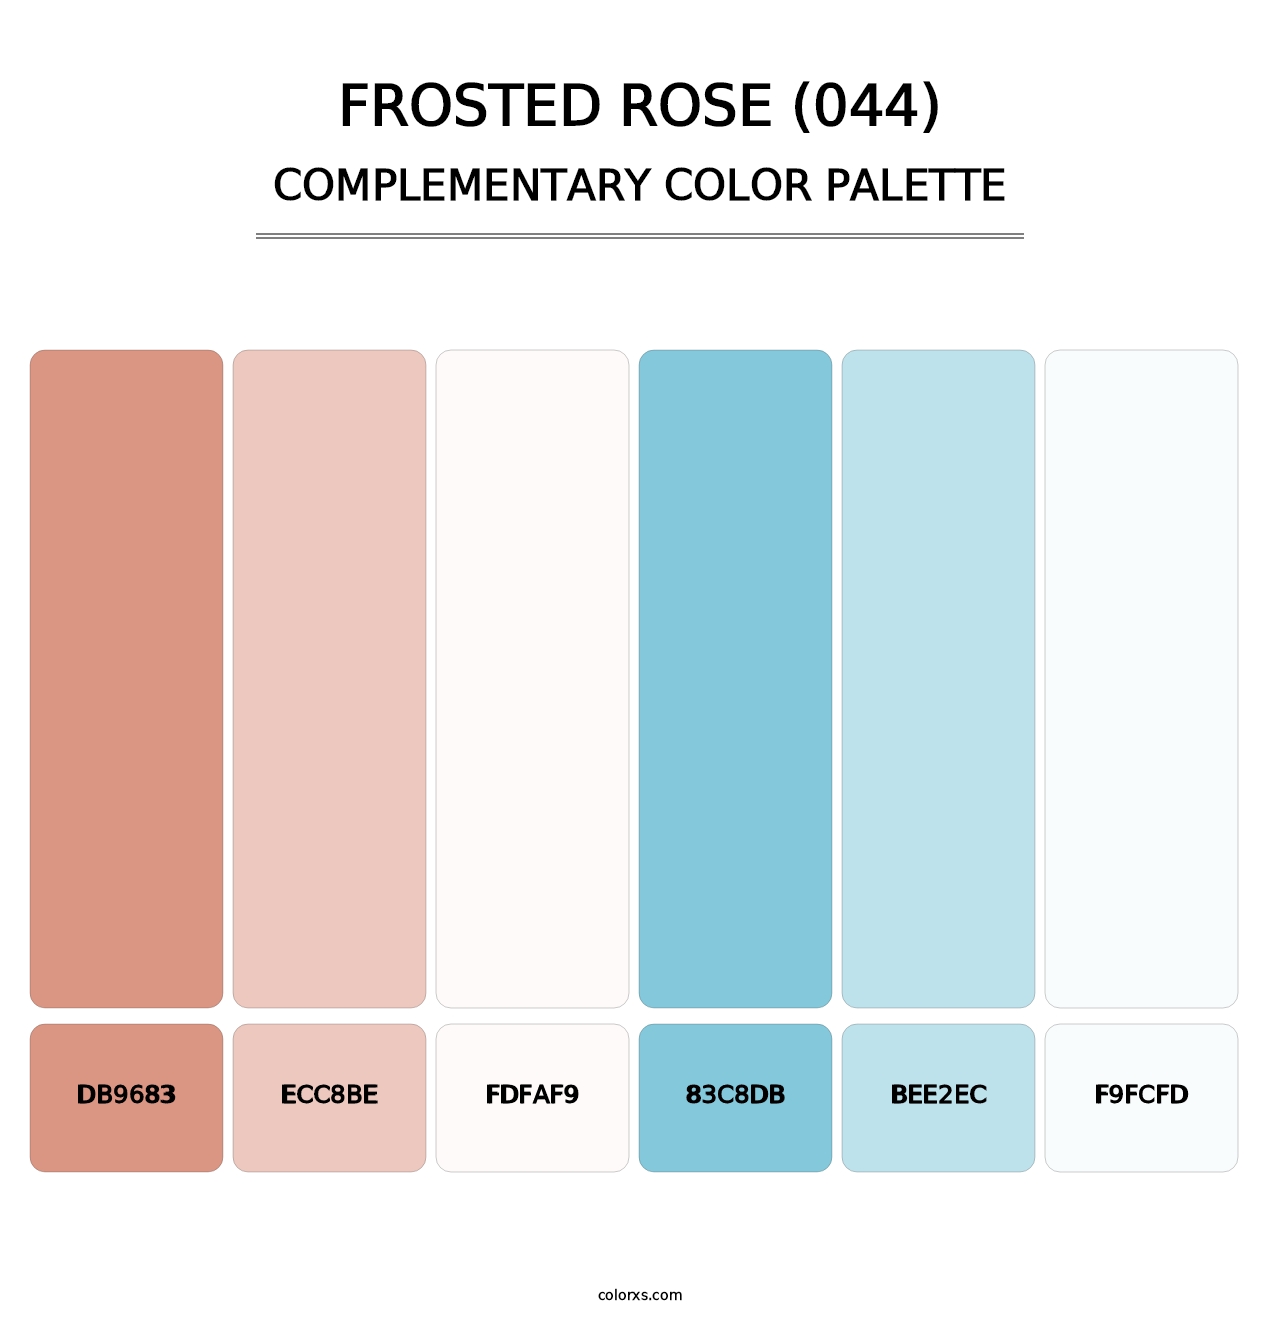 Frosted Rose (044) - Complementary Color Palette